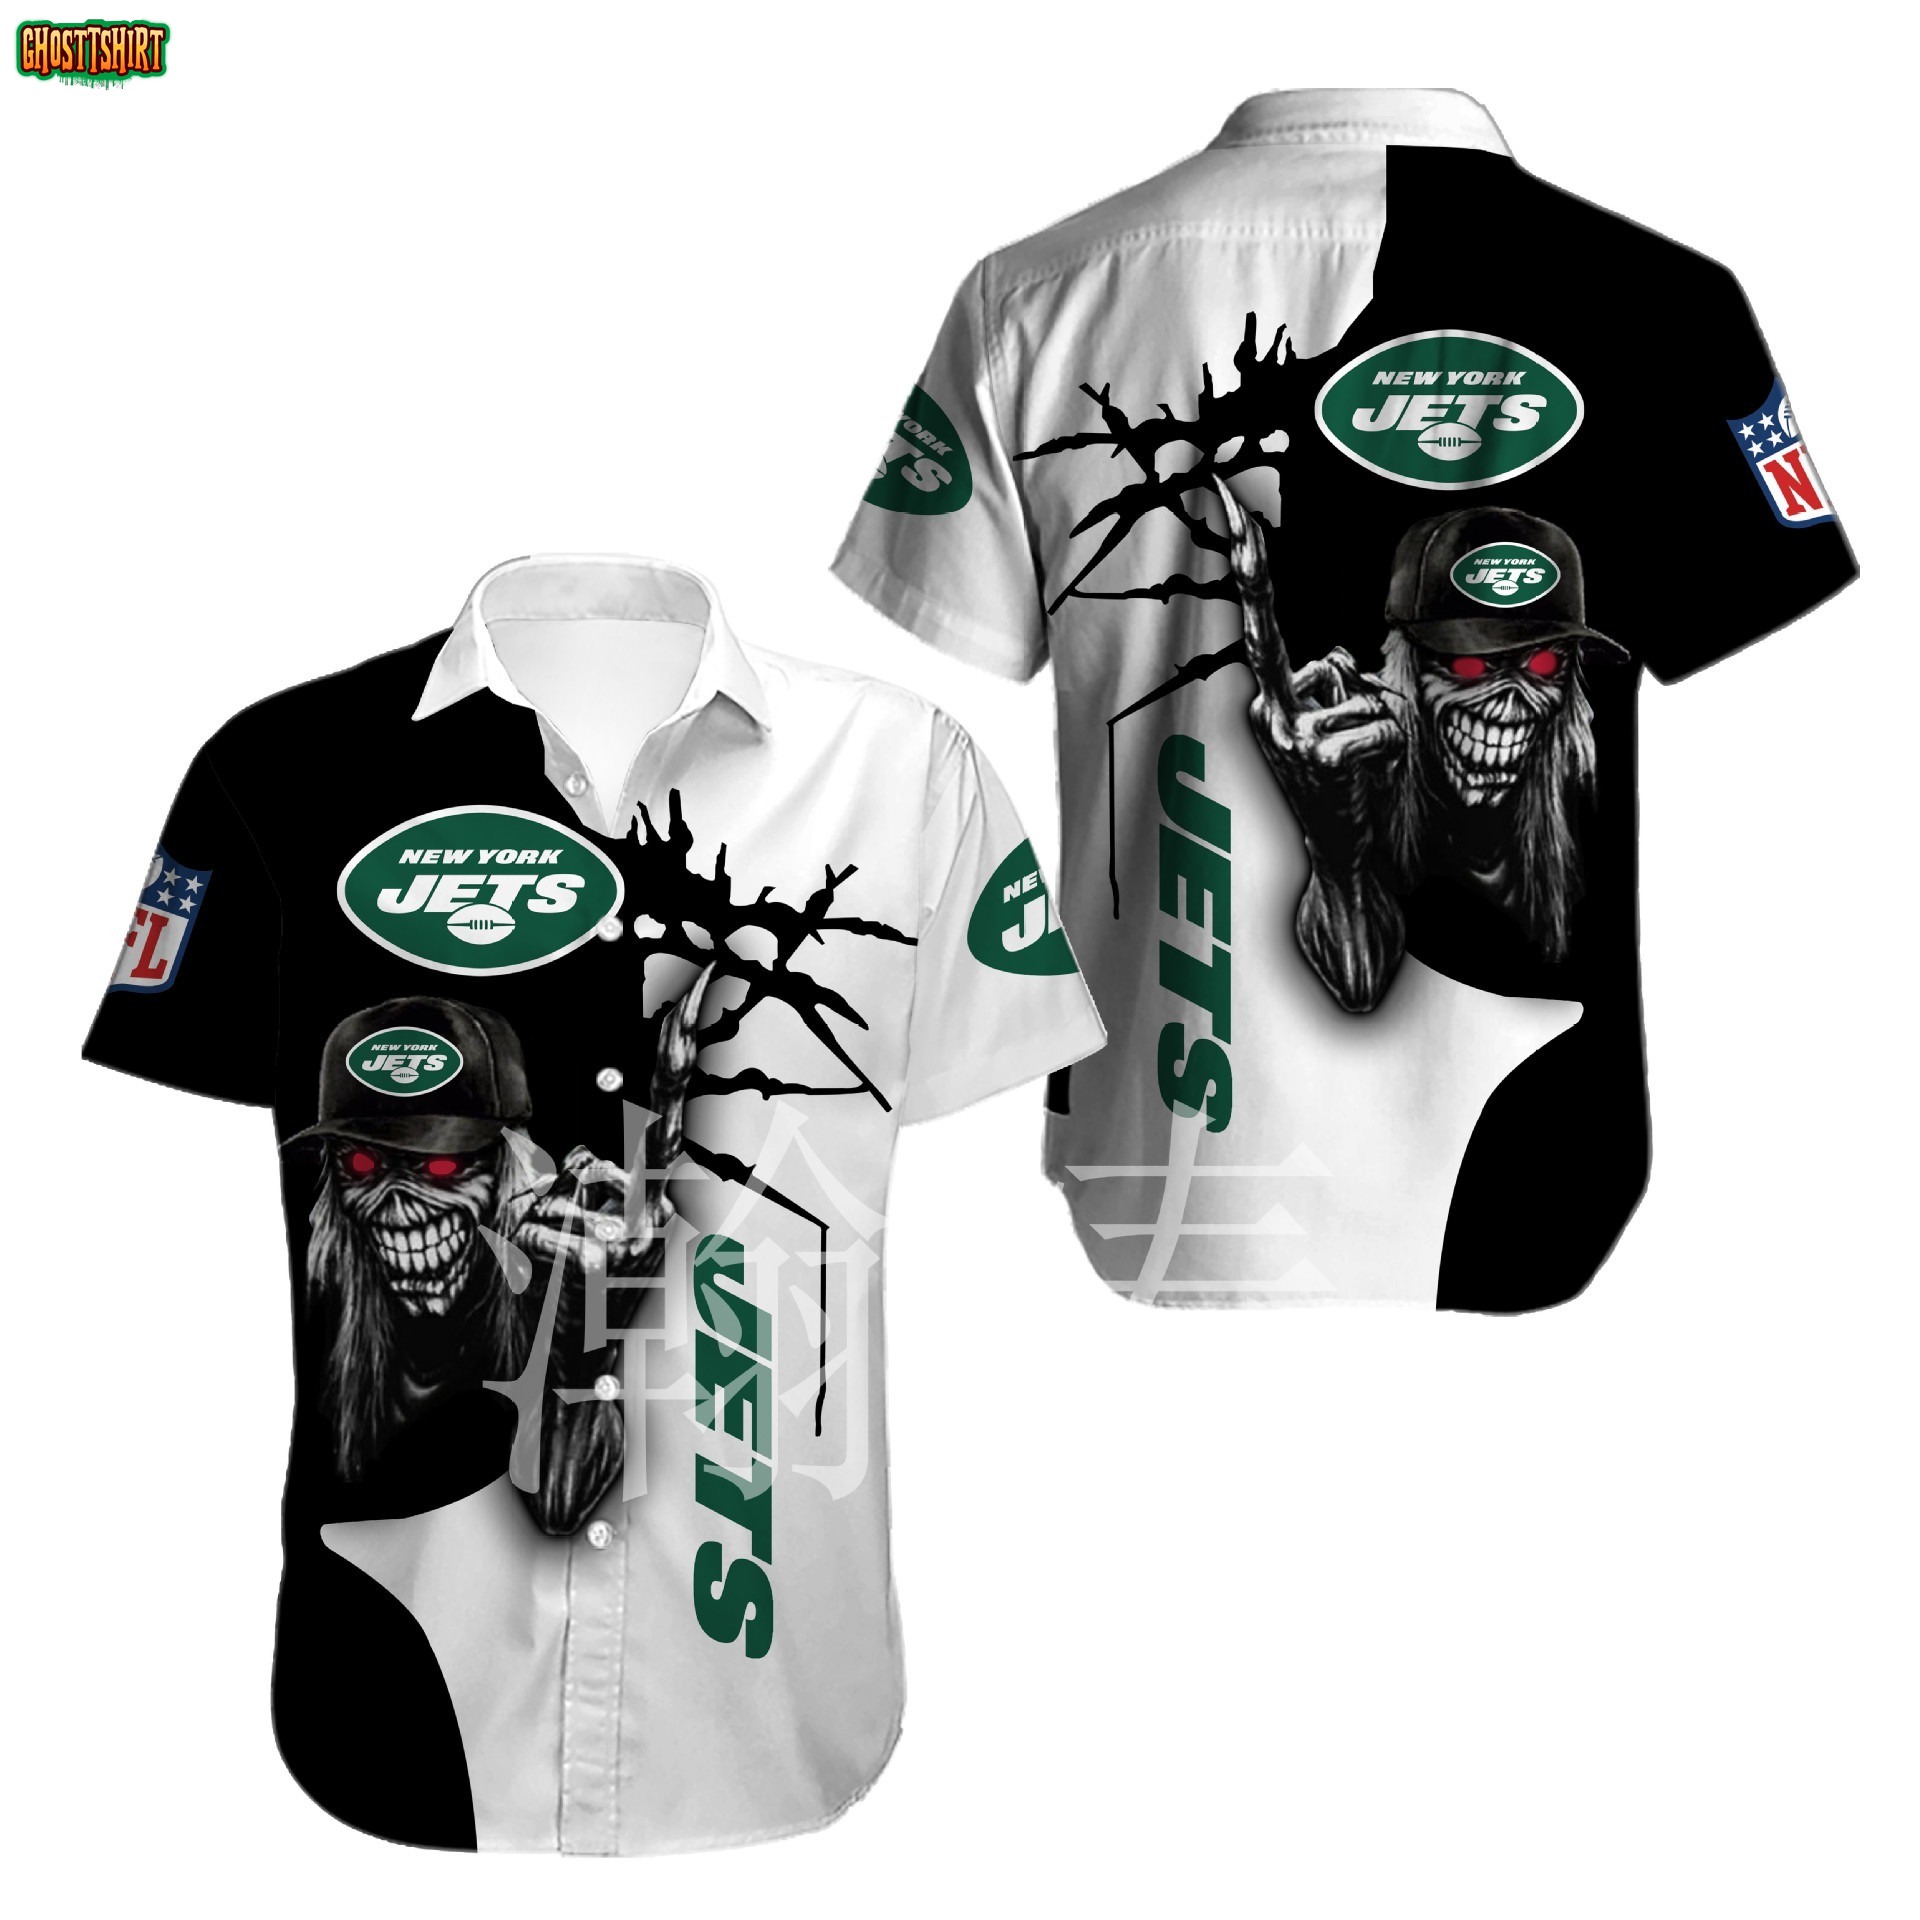 New York Jets button-up shirt Iron Maiden gift for Halloween